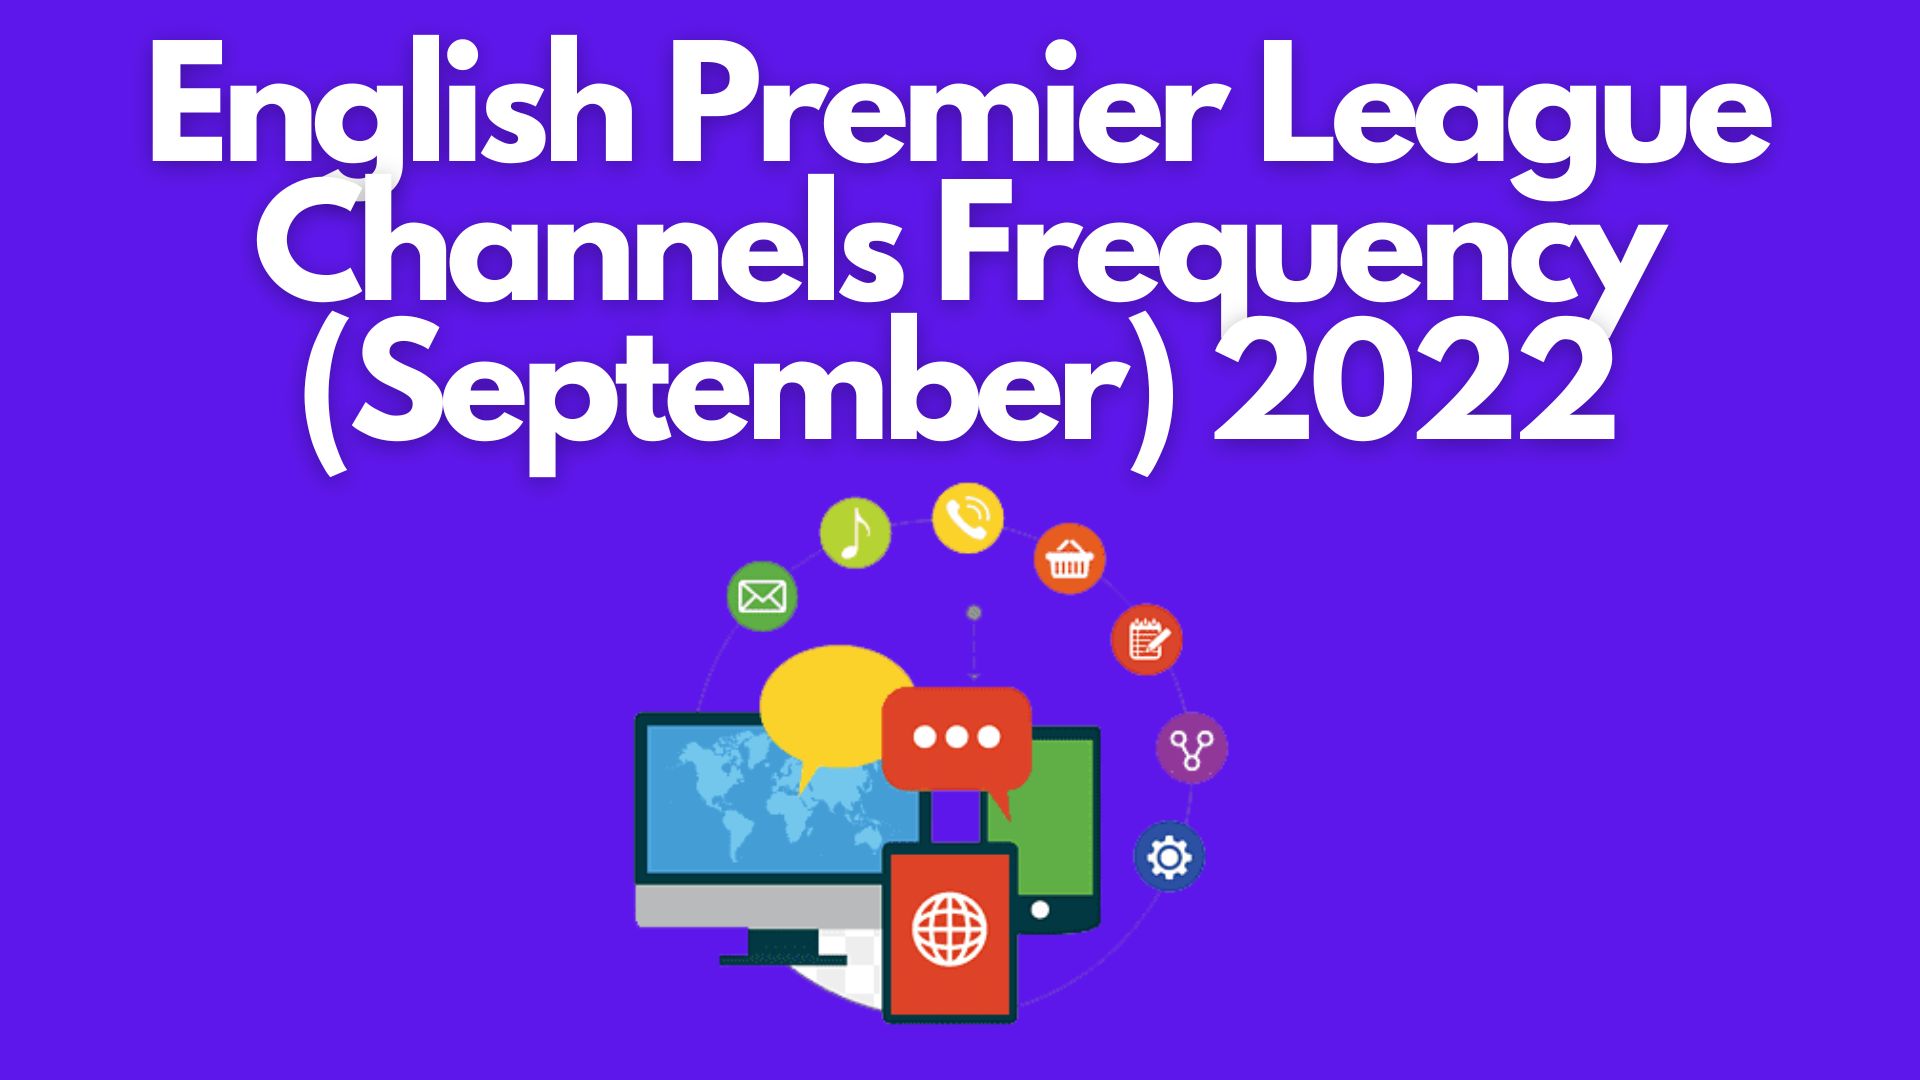 English premier league channels frequency (september) 2022